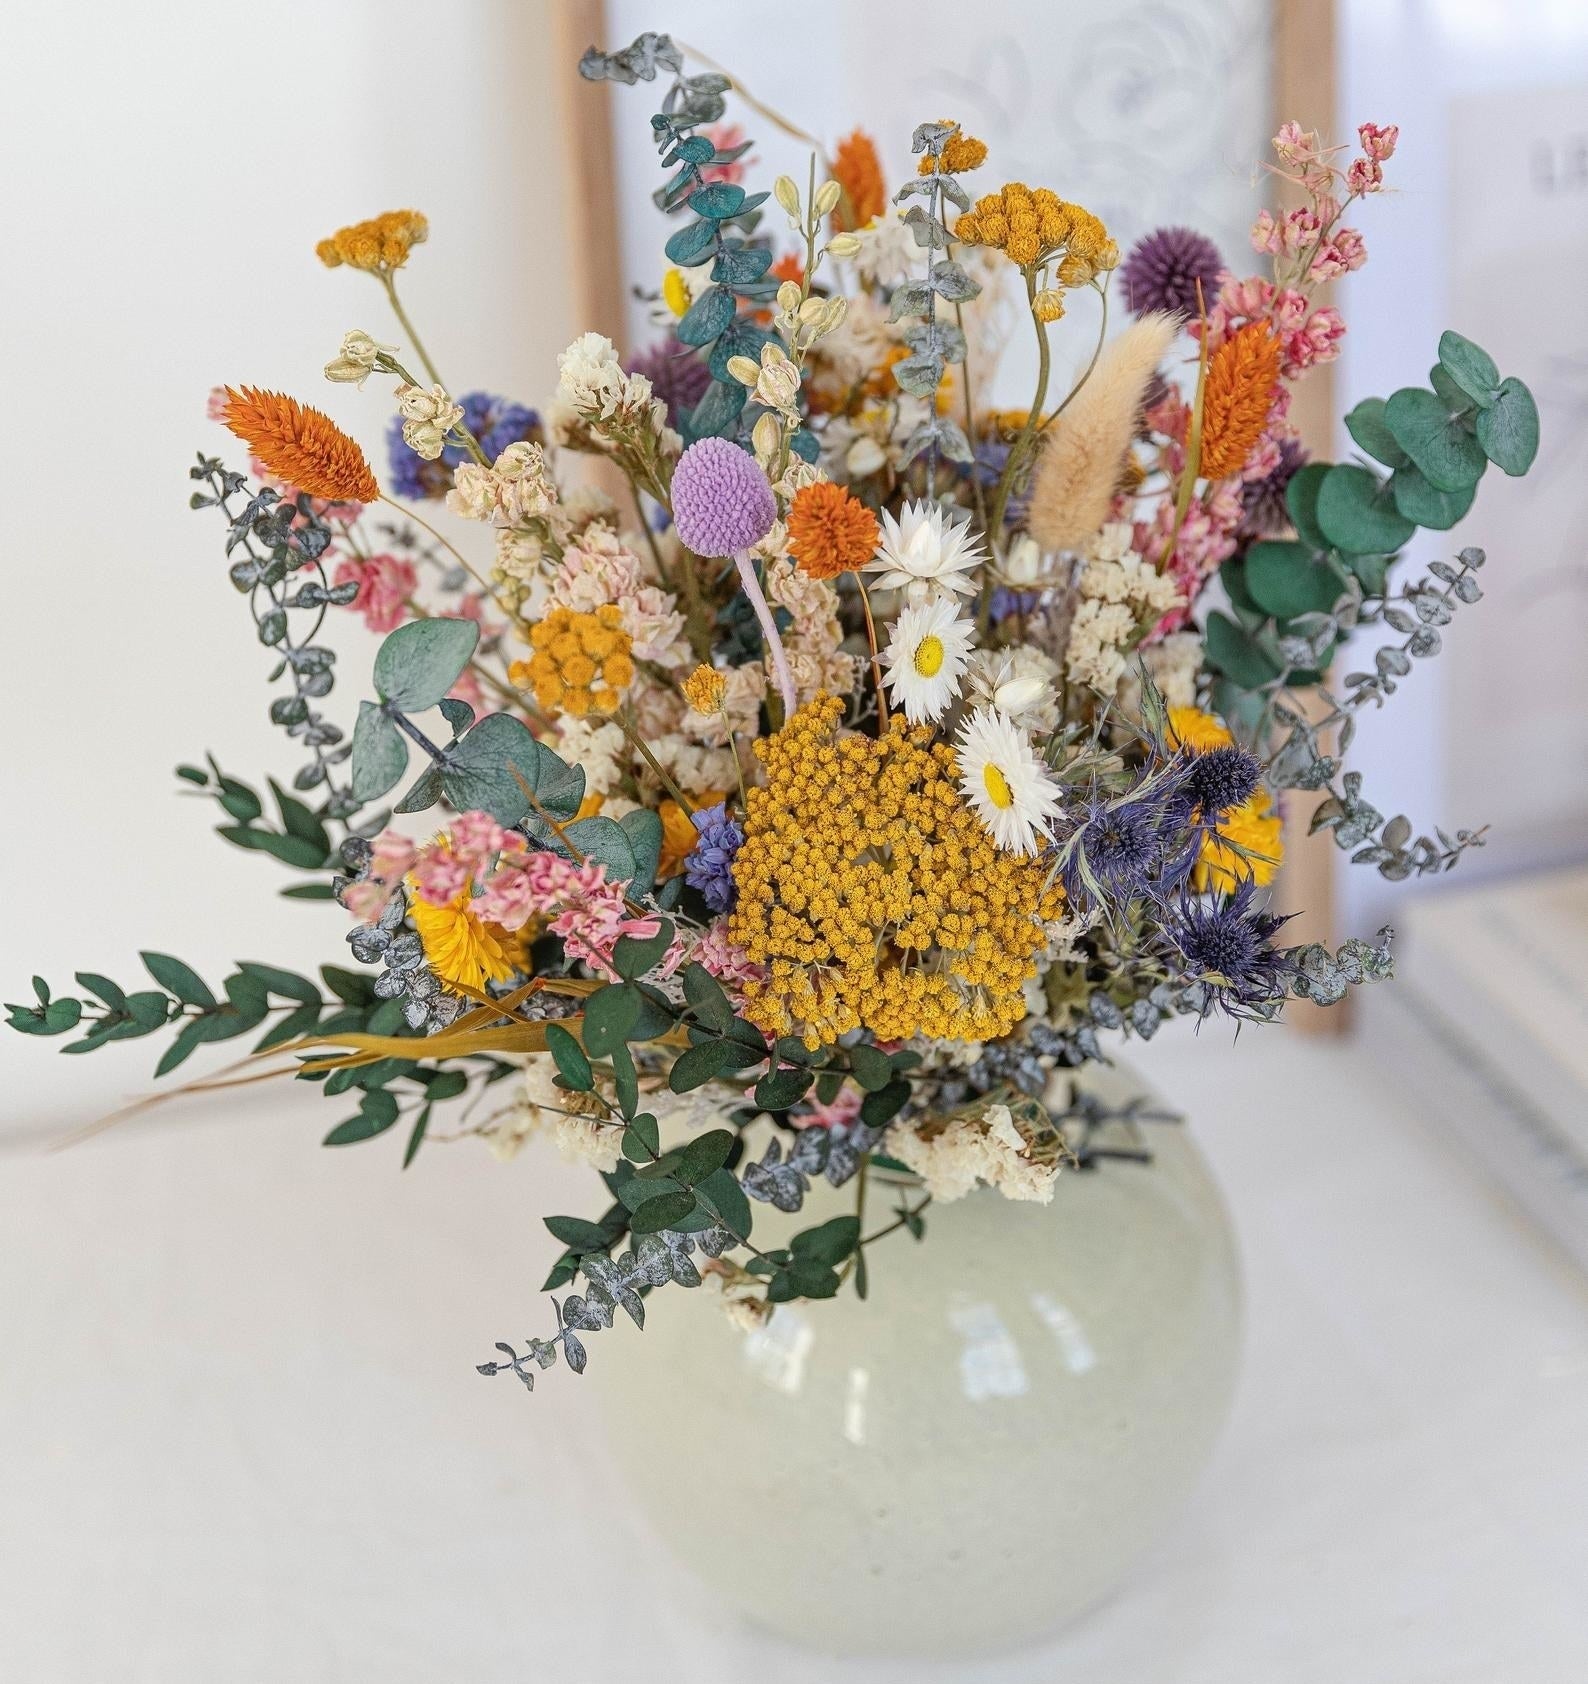 the bouquet in a vase